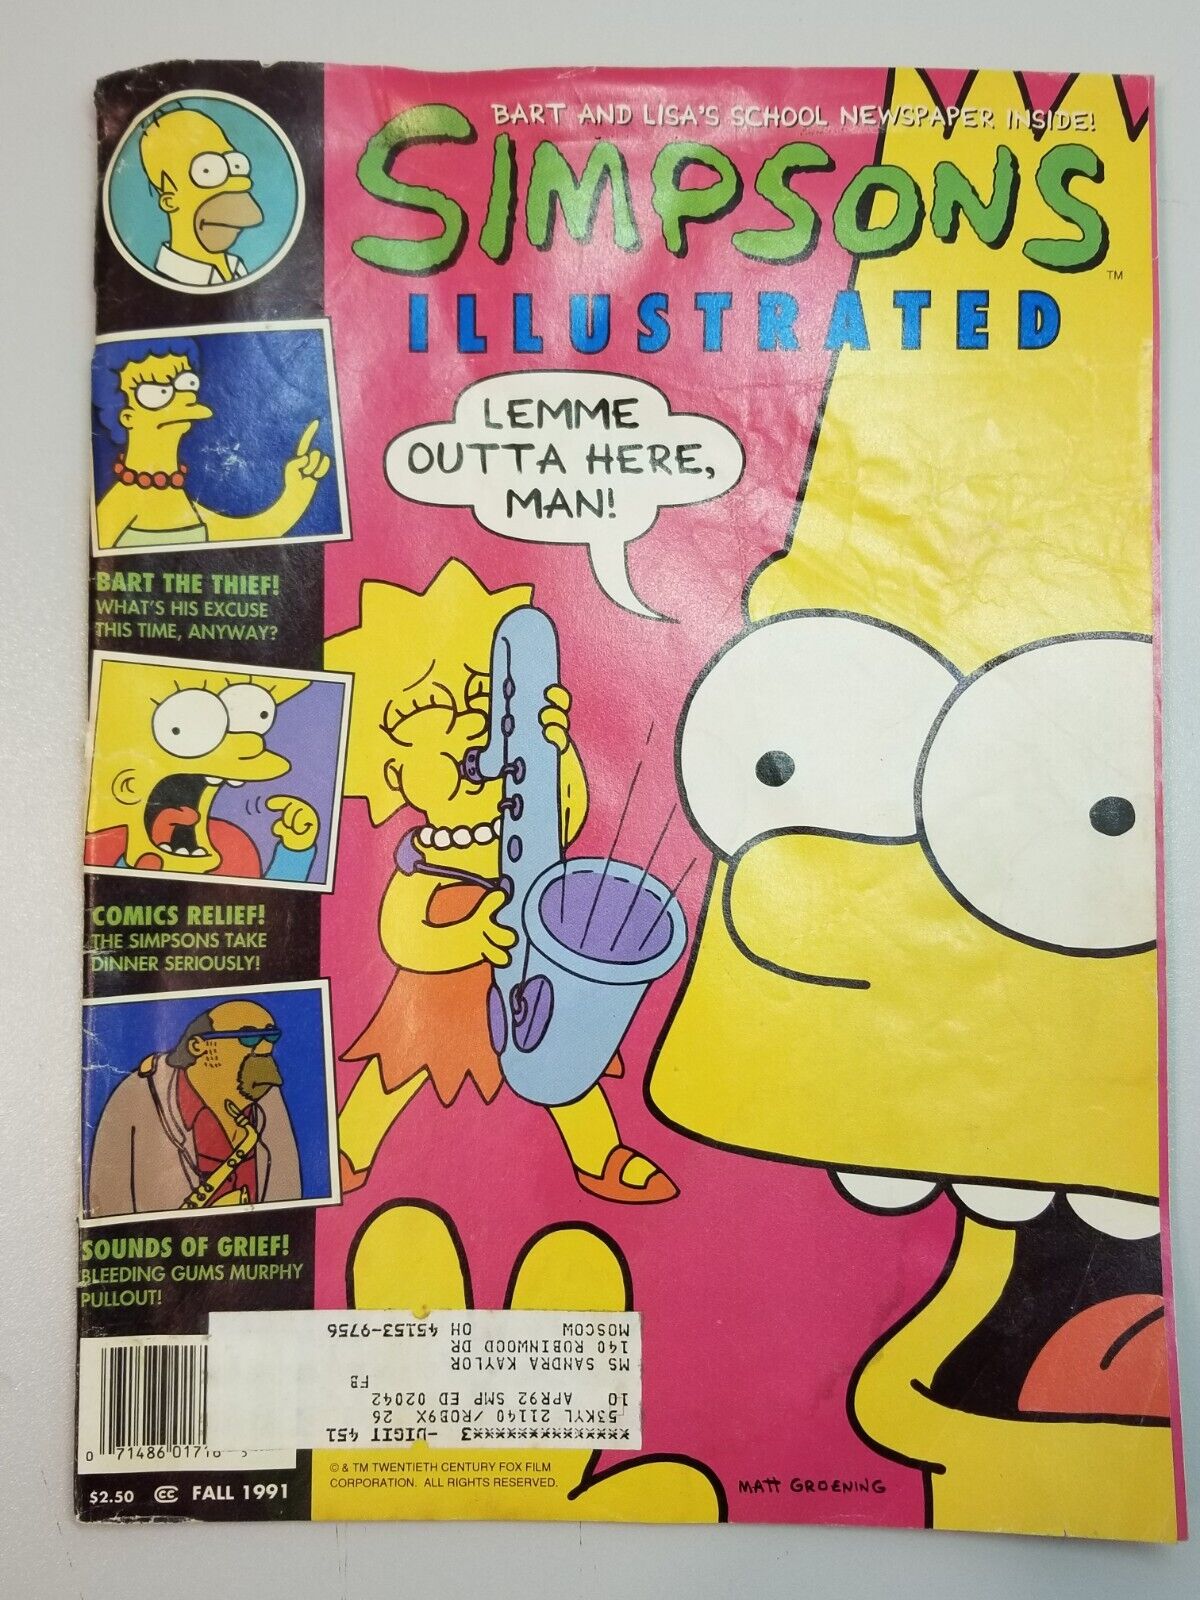 Vintage Simpsons Illustrated Issue No. 3  Fall 1991 Weekly News Insert Included